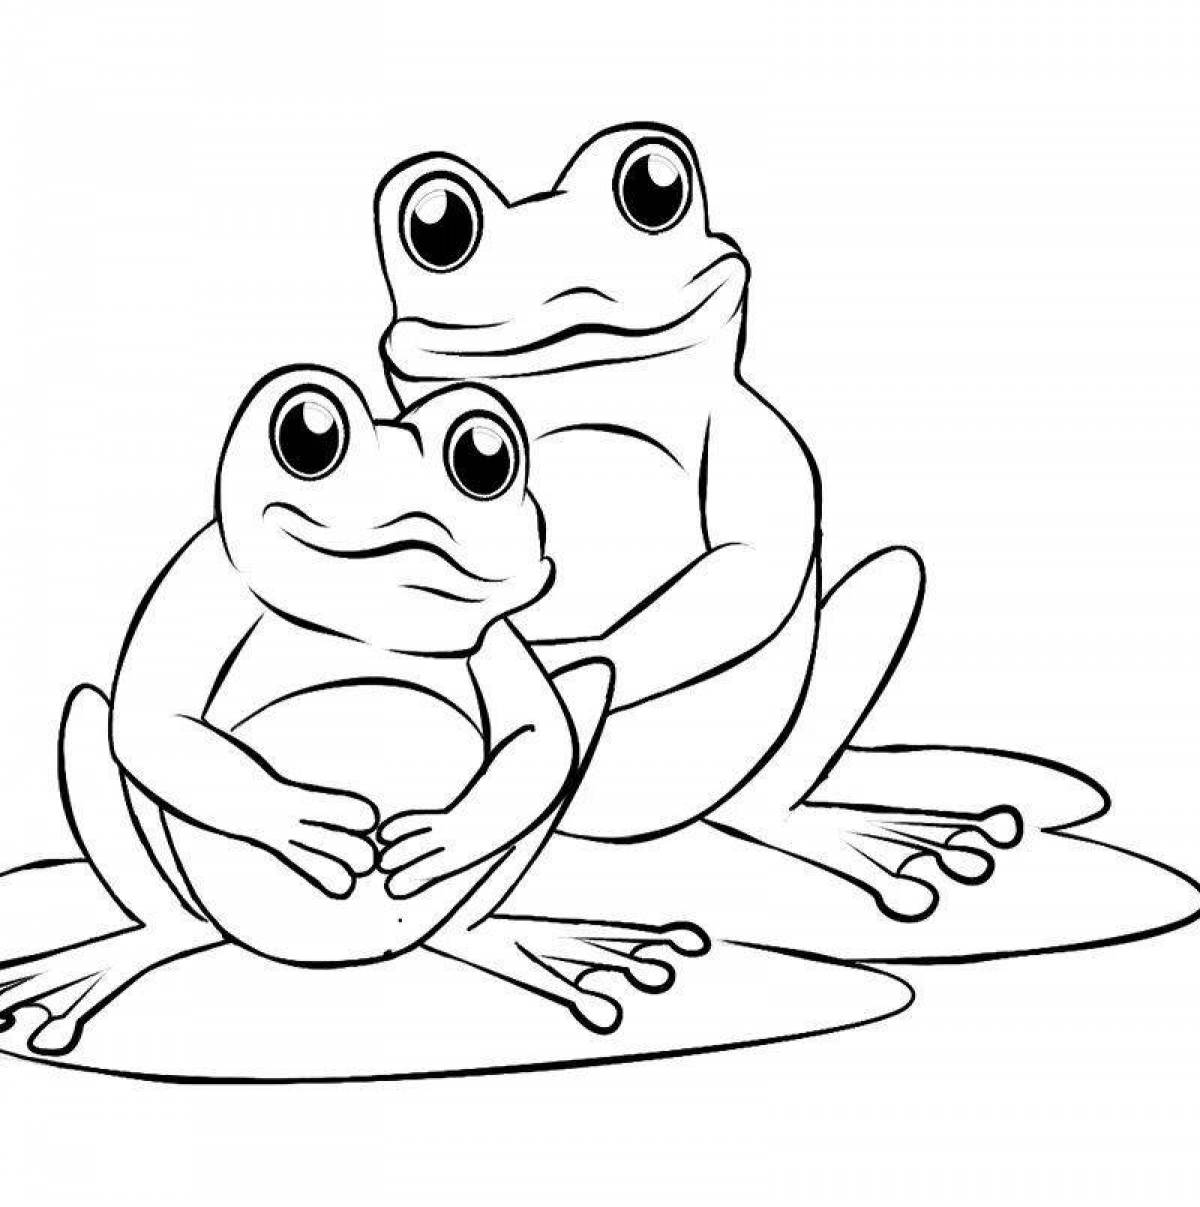 Colorful frog coloring page